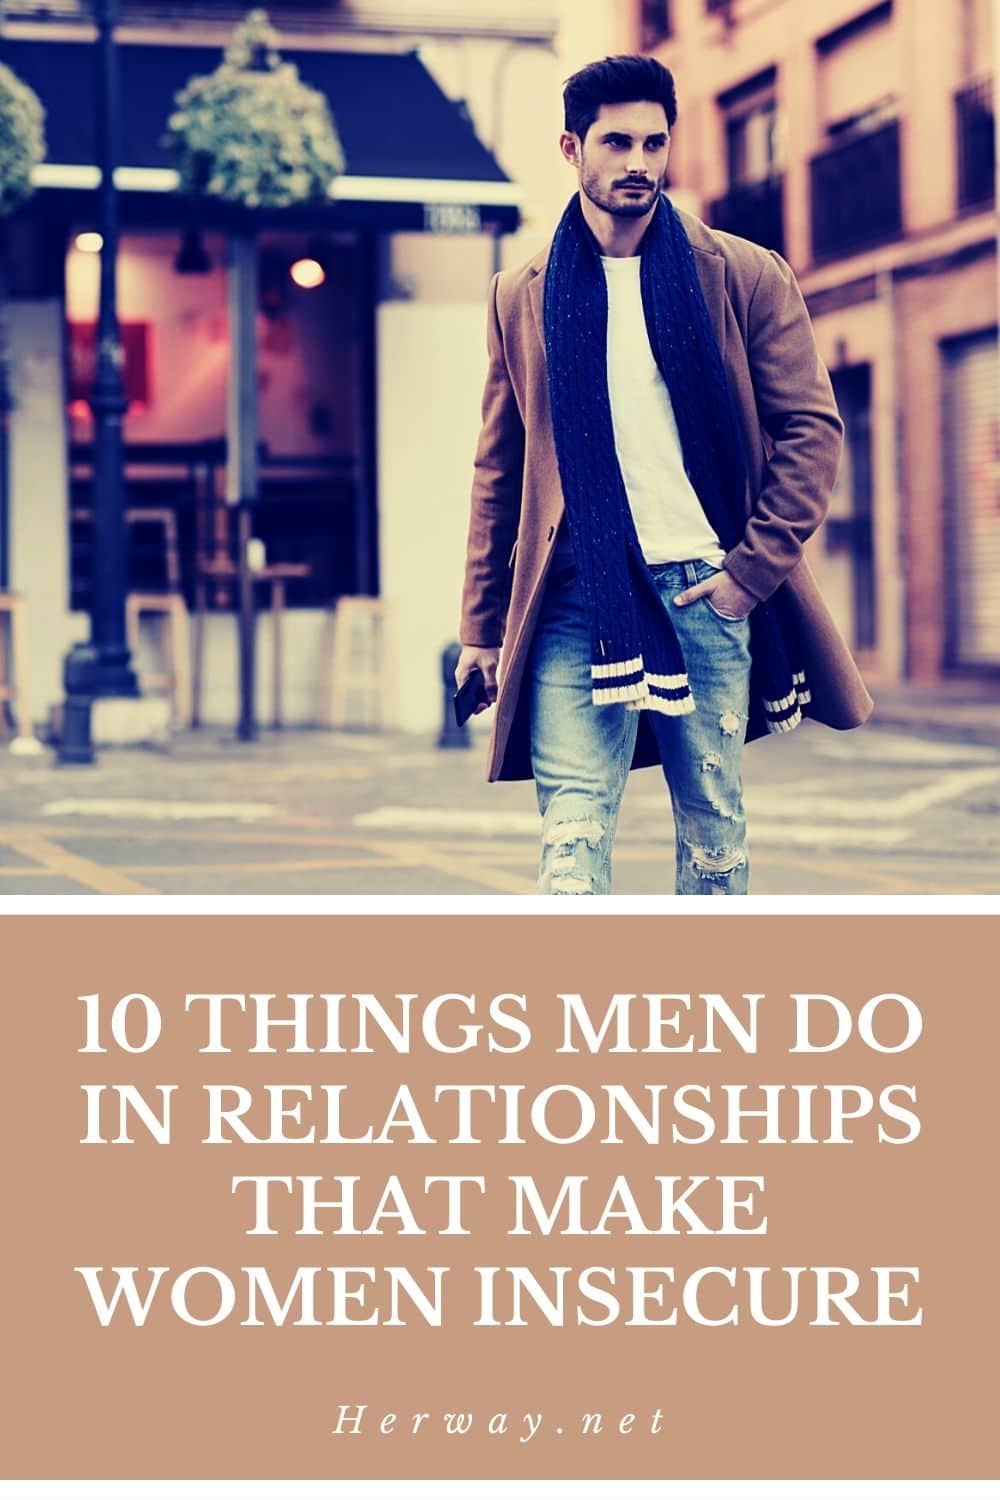 10 Things Men Do In Relationships That Make Women Insecure